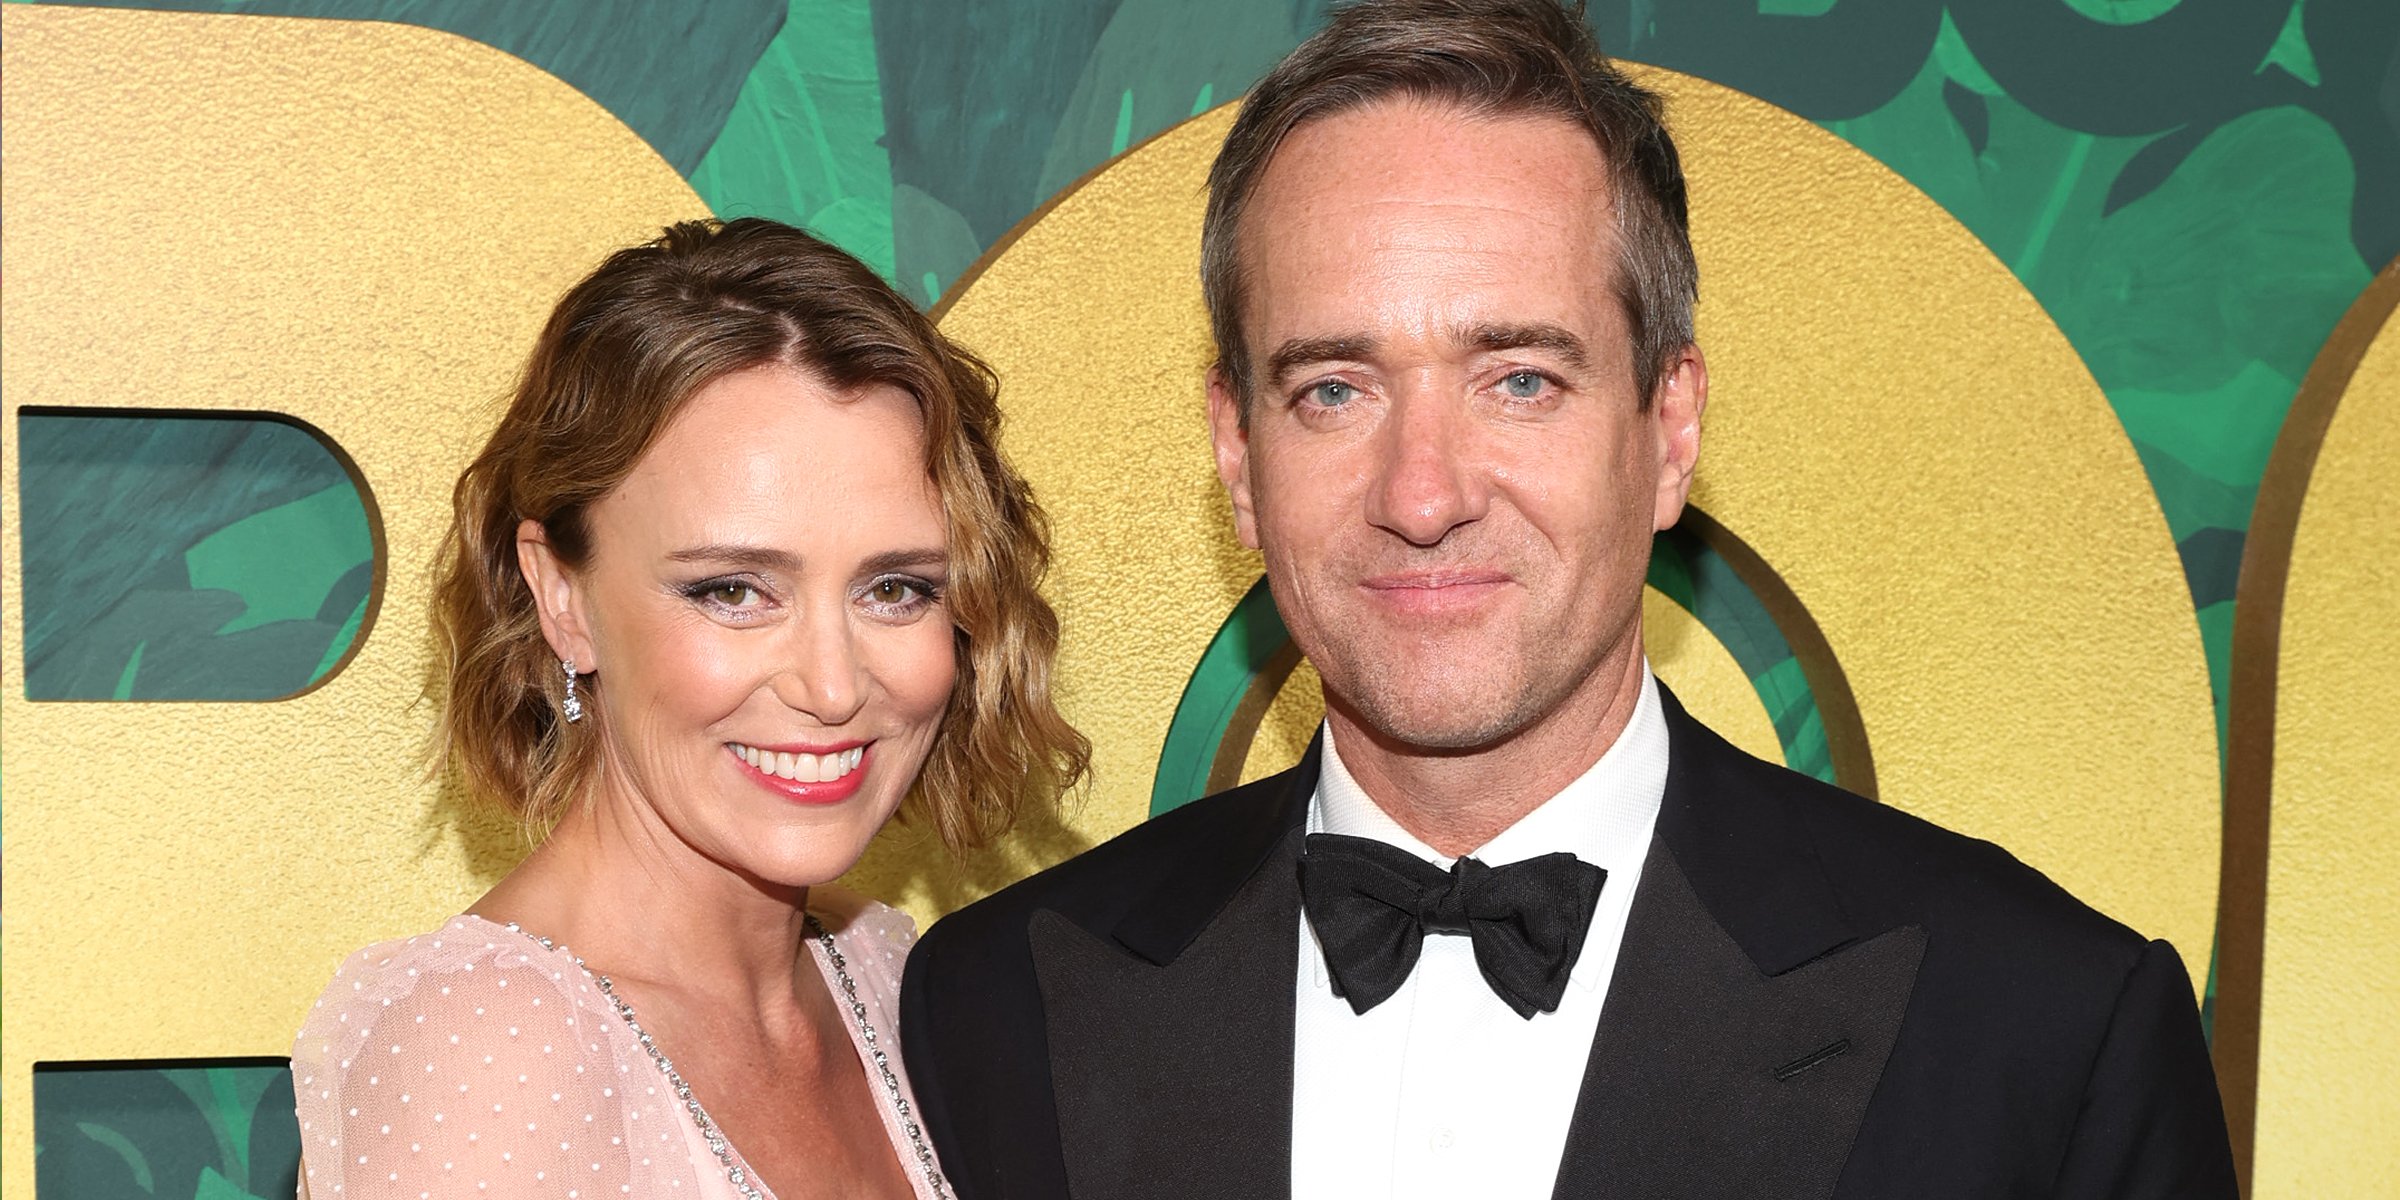 Keeley Hawes and Matthew Macfadyen | Source: Getty Images